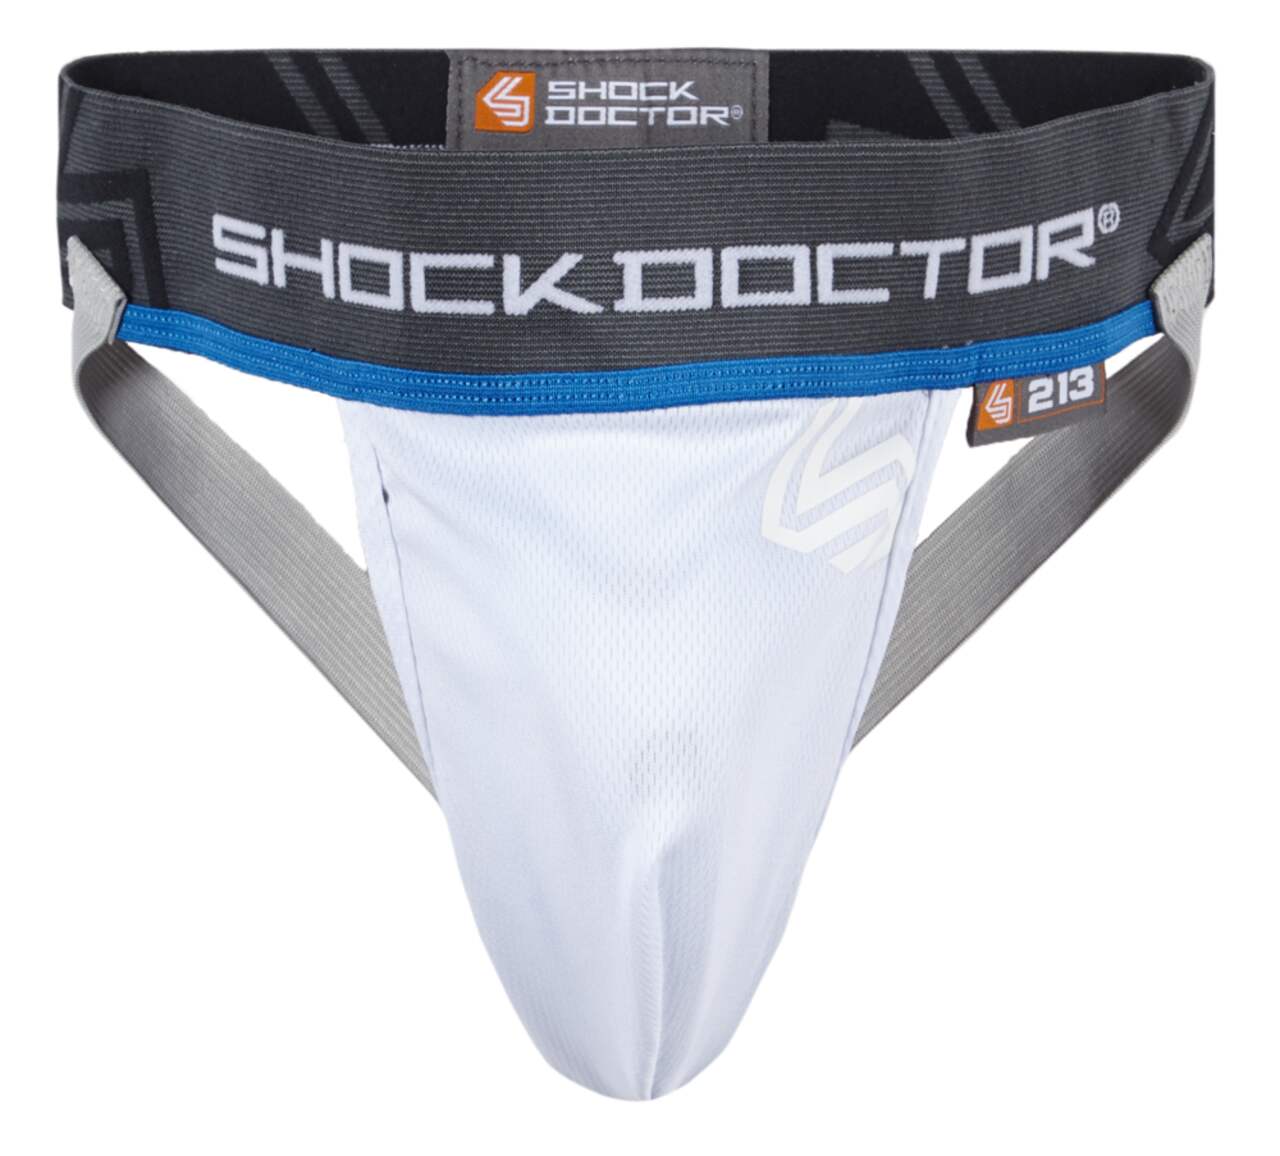 Shock Doctor 201-12-10 Bioflex Youth Cup, Small Red price in Dubai, UAE